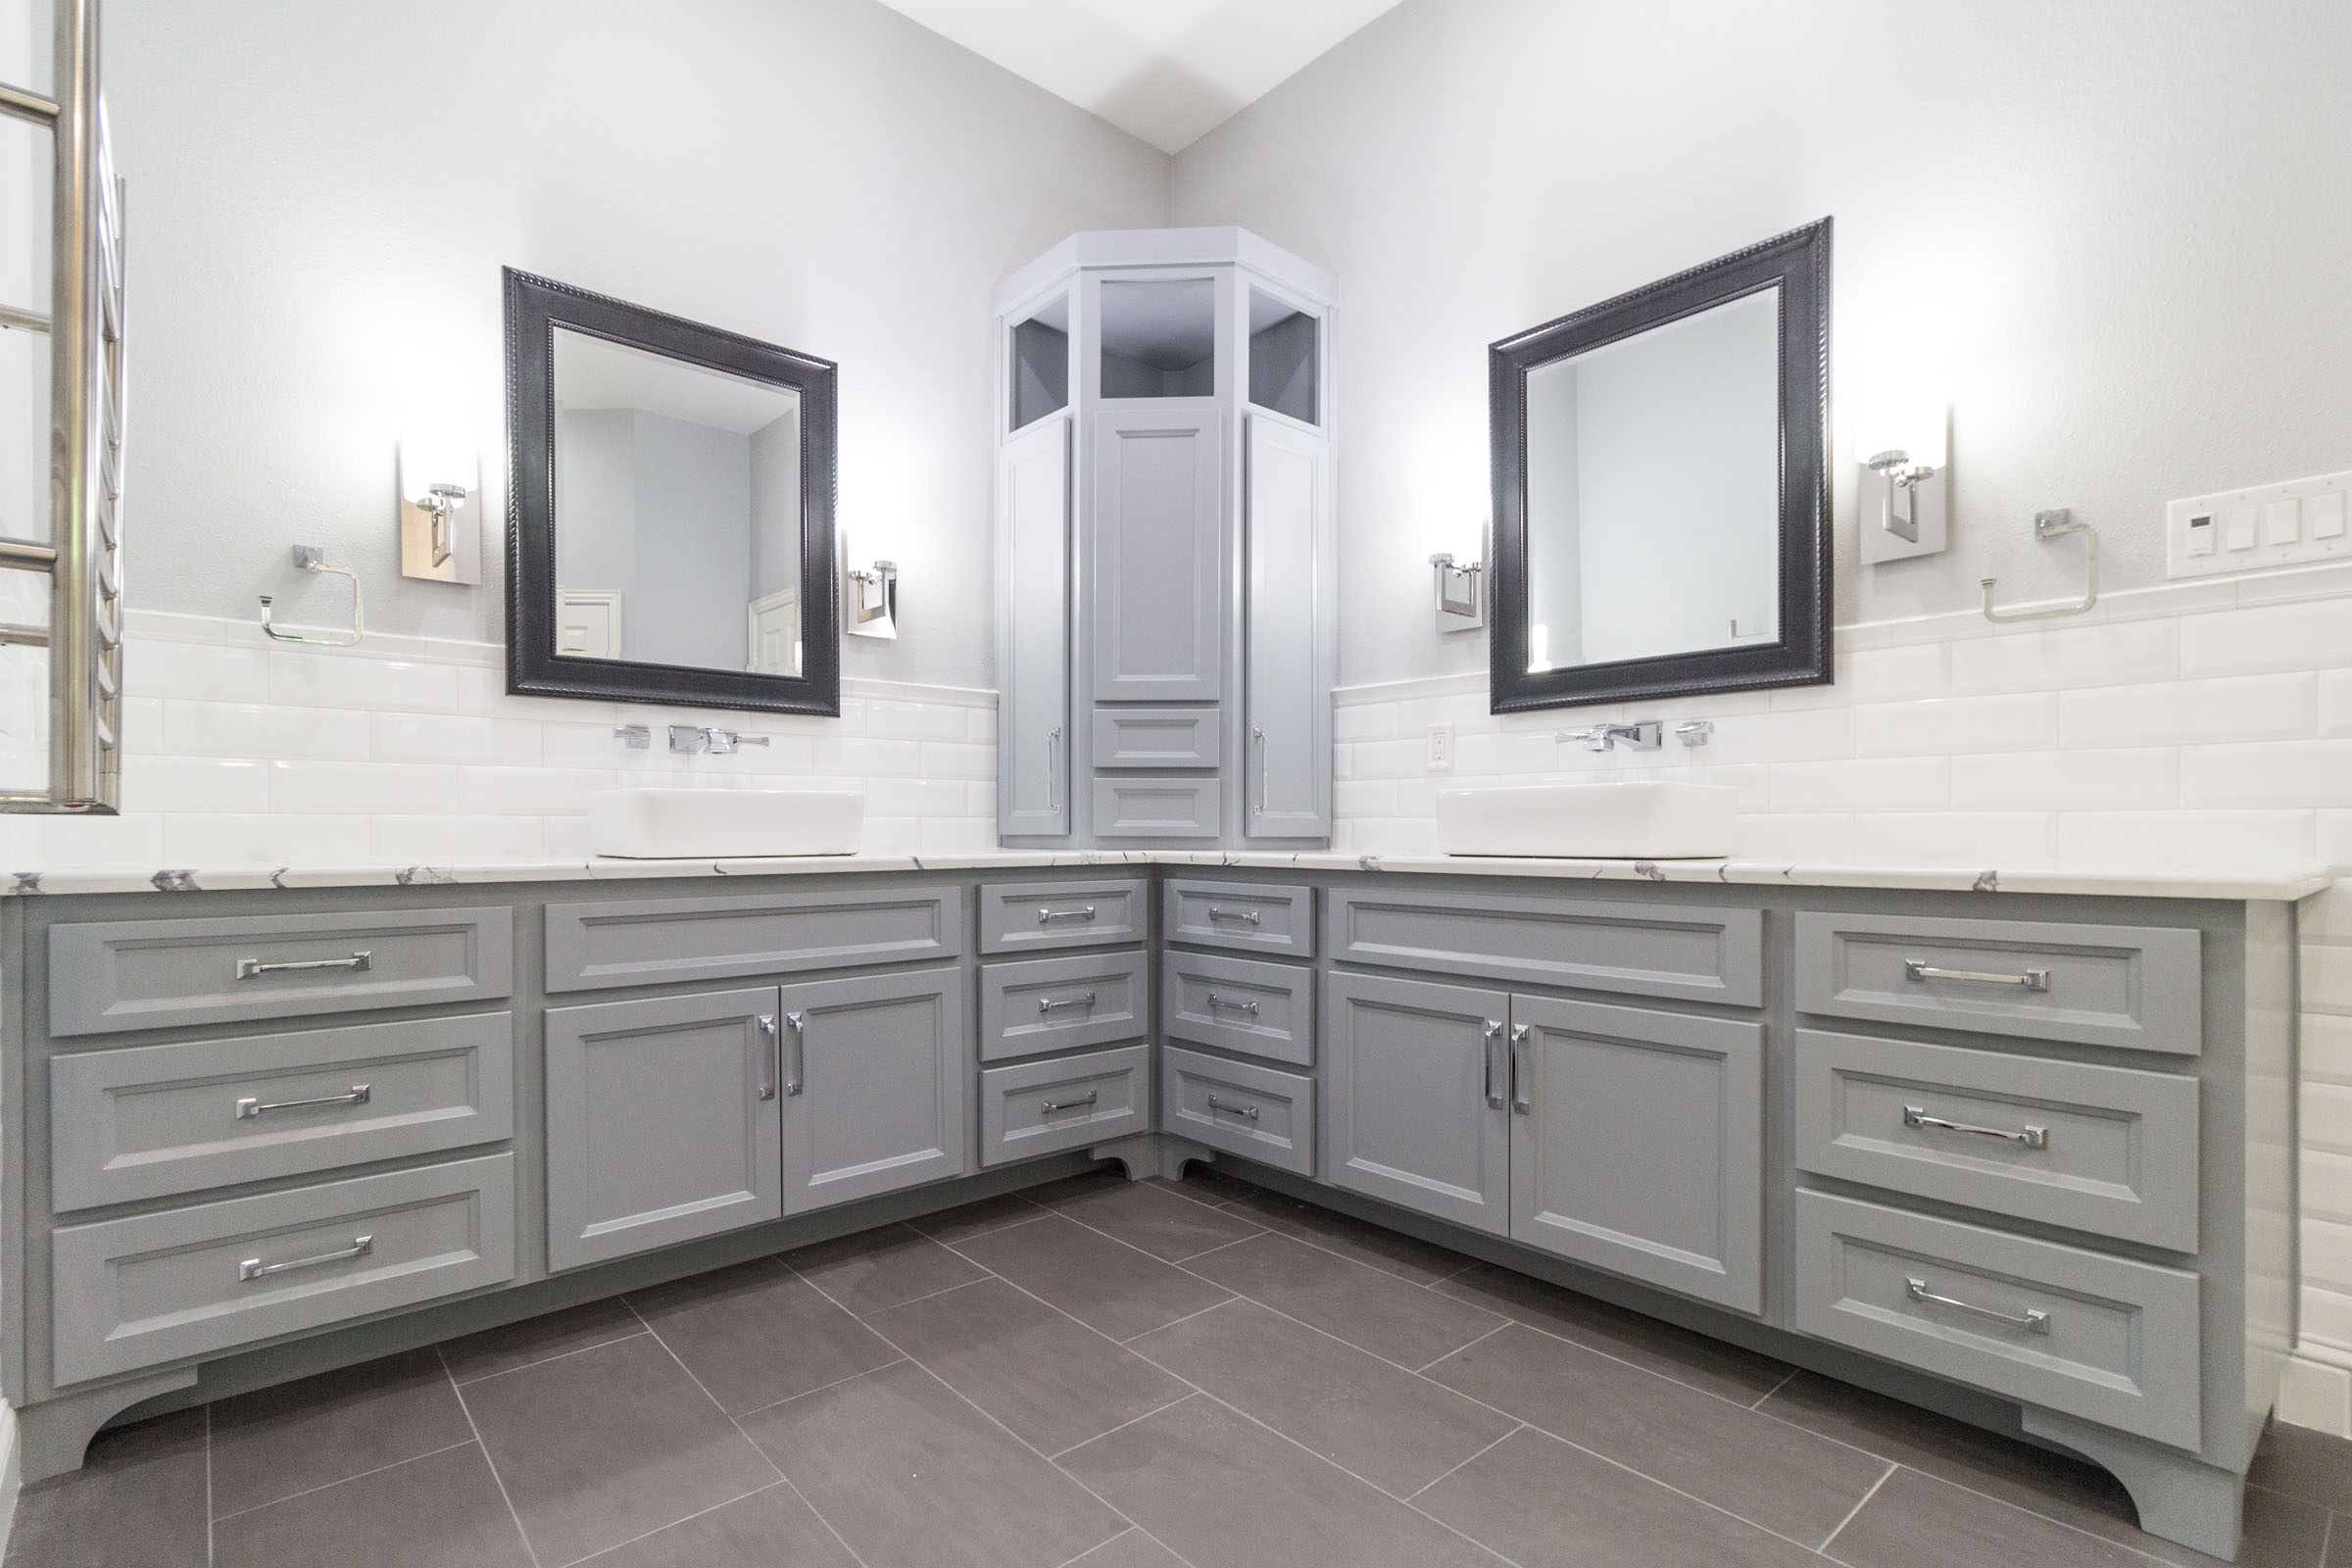 Contemporary bathroom remodel, chrome hardware, white subway tile, grey cabinets, granite countertops, black trimmed mirrors